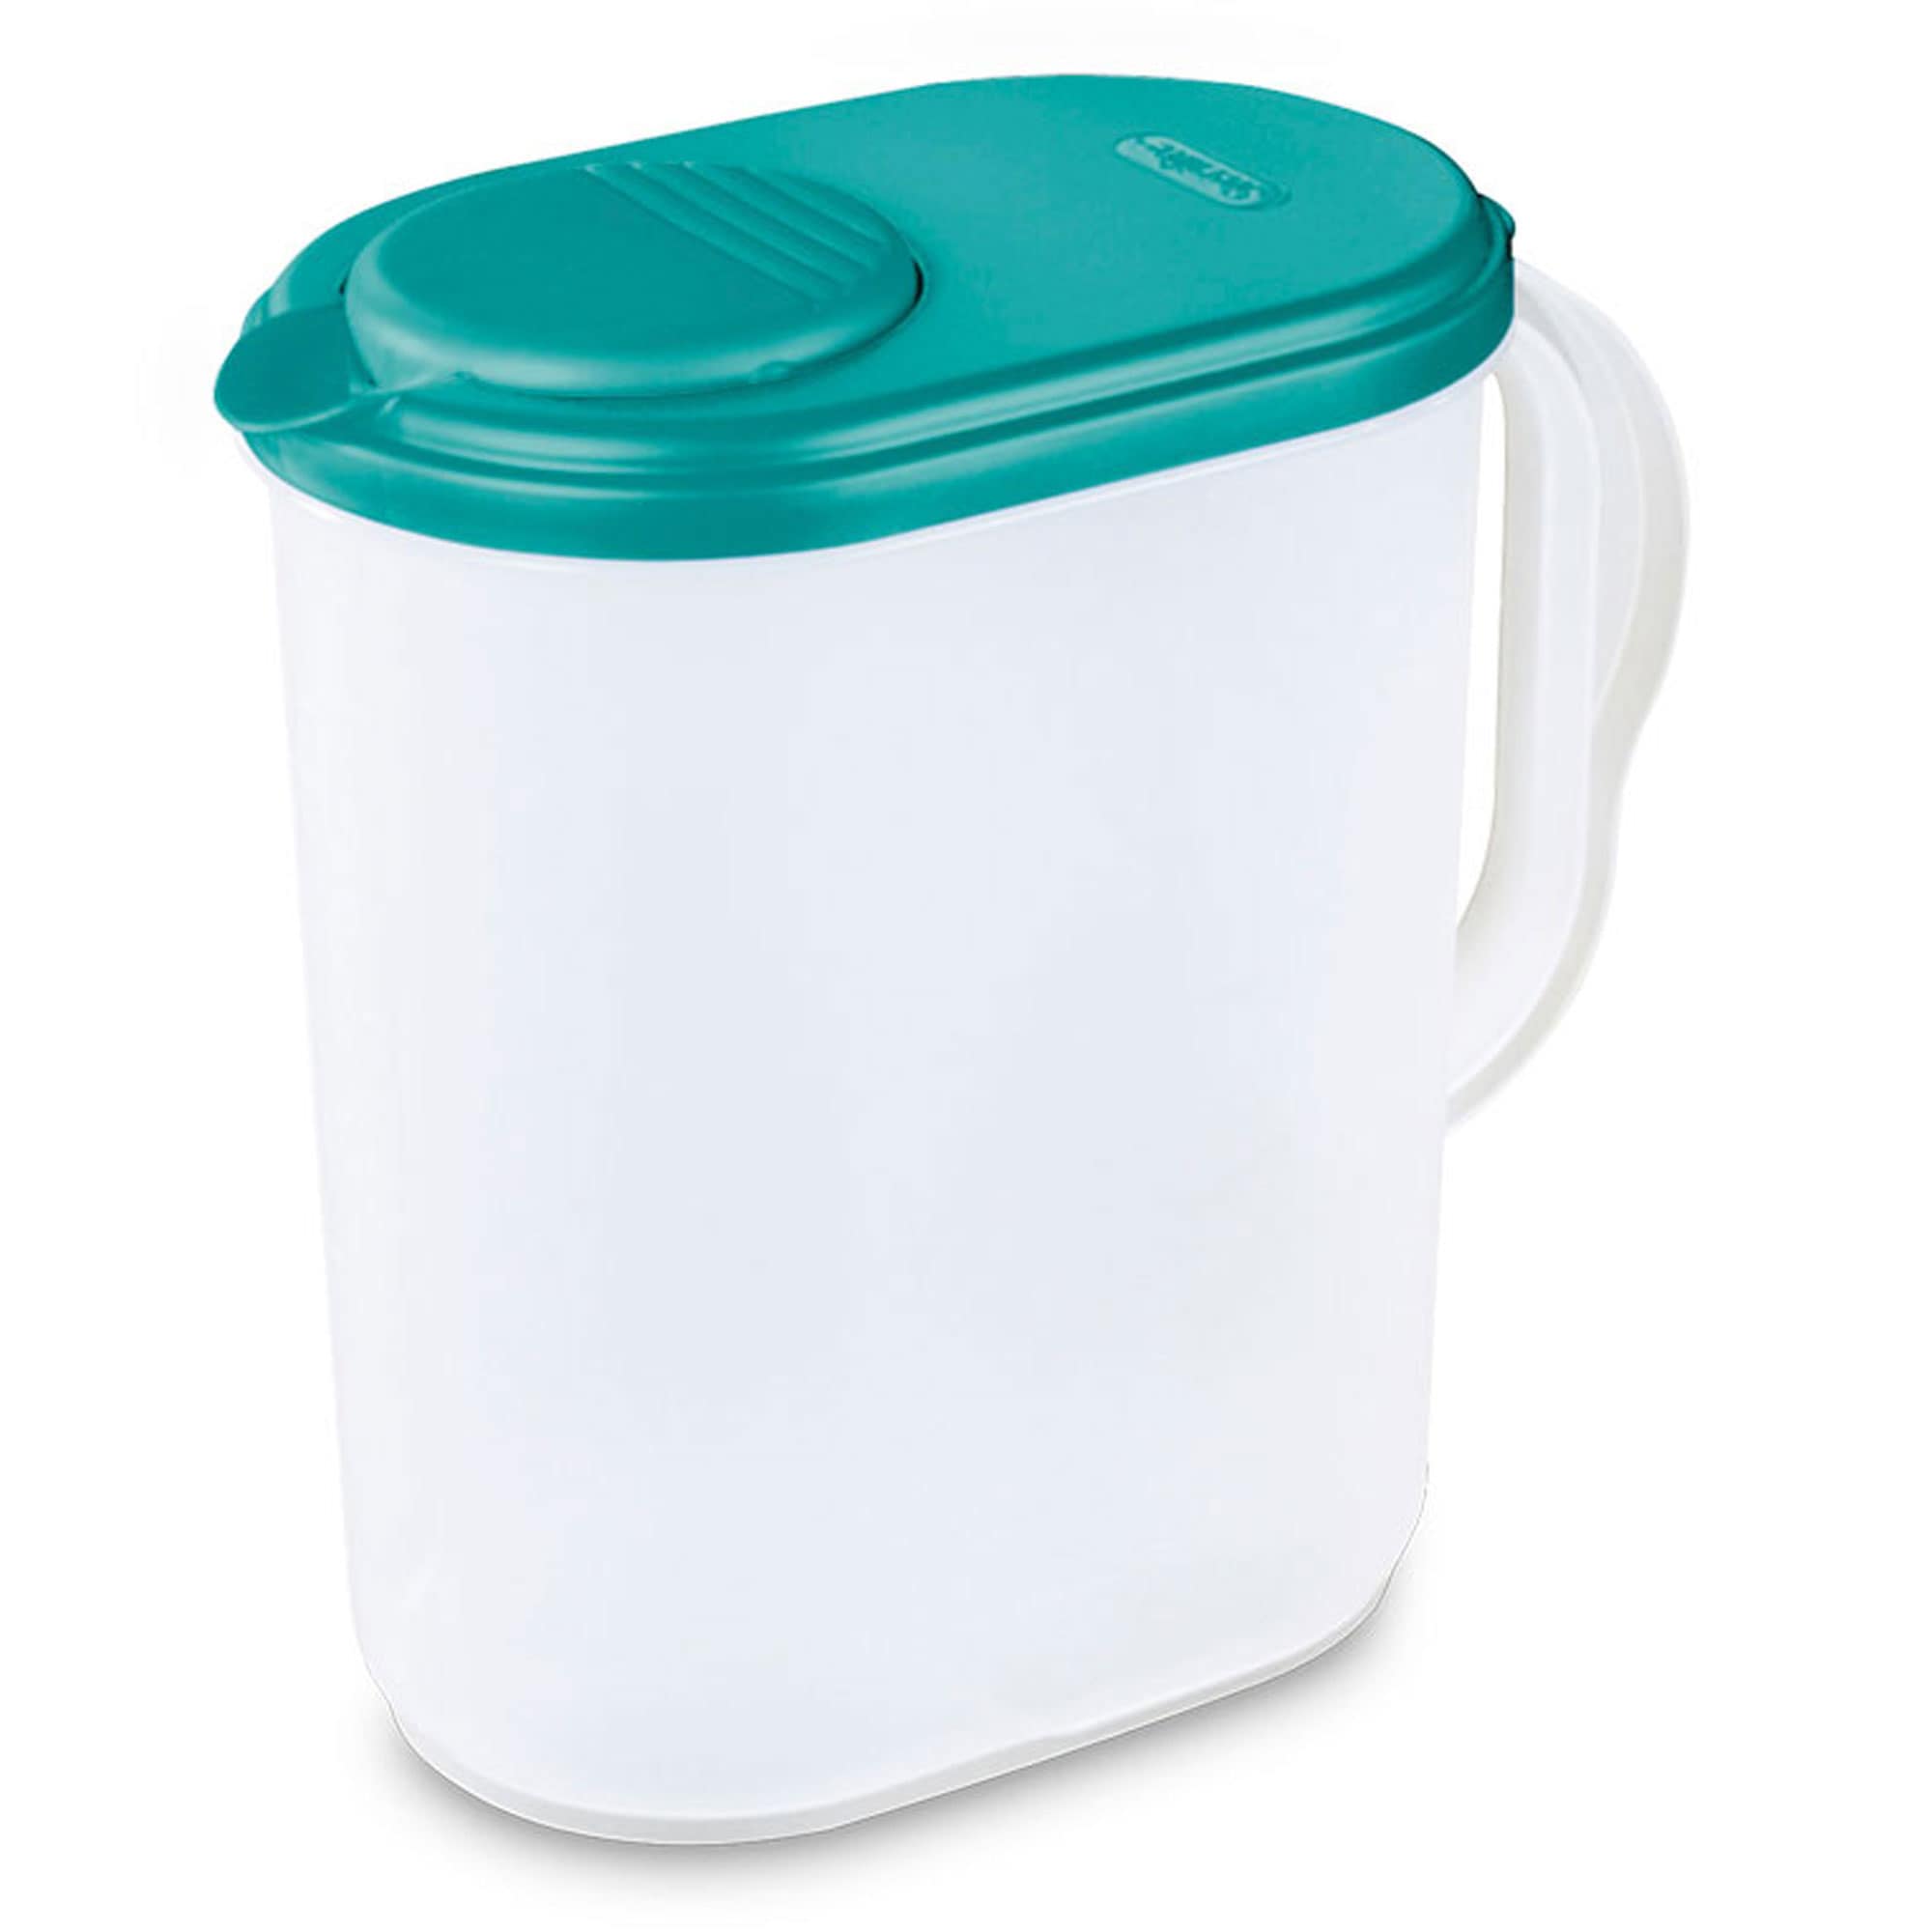 G.E.T. Heavy-Duty 1 Gallon Plastic Pitcher with Lid, Clear, BPA Free